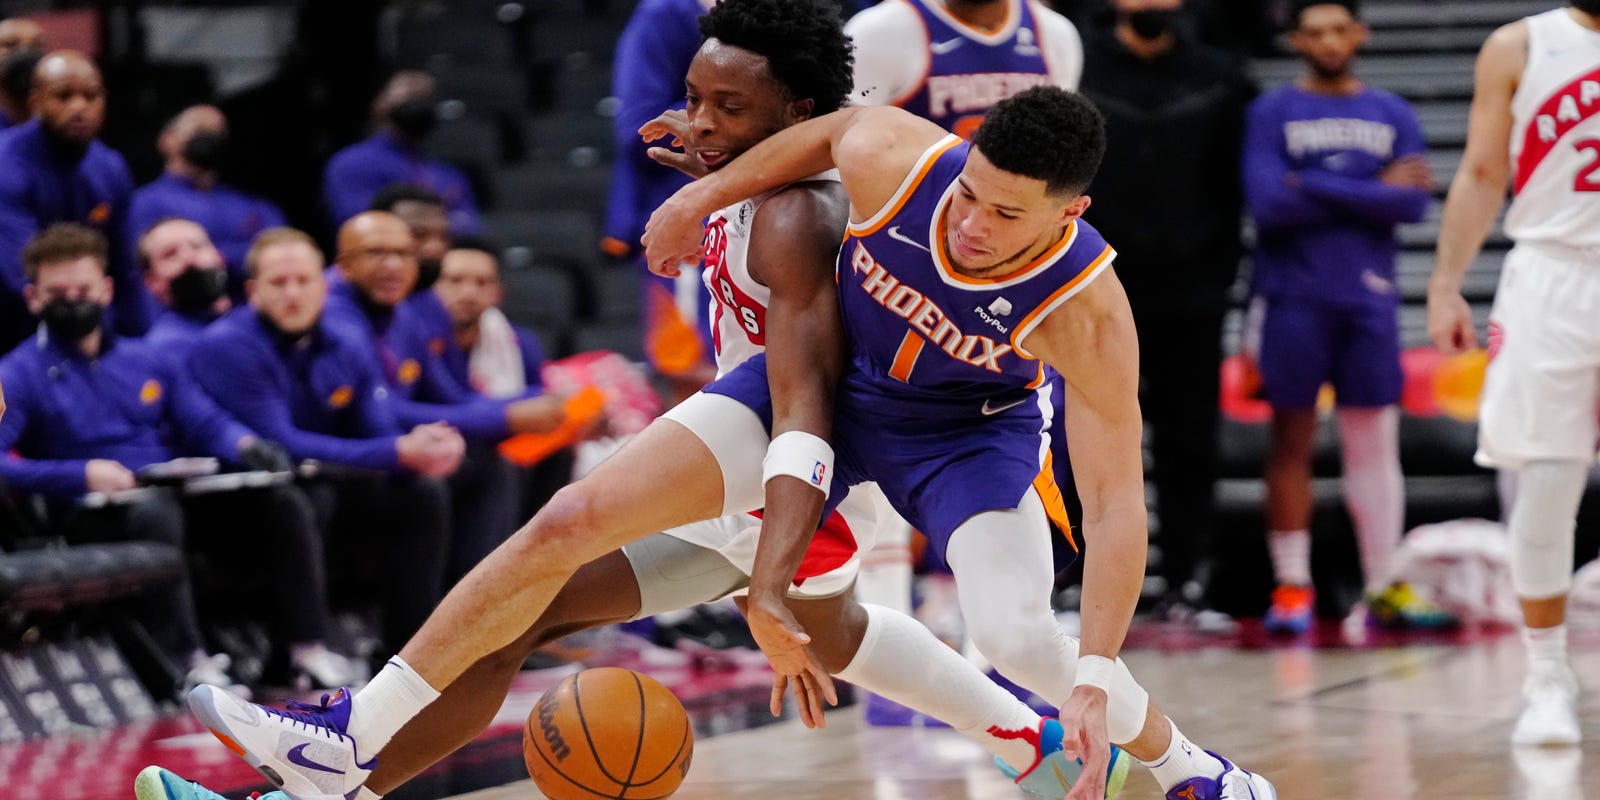 ‘Too blessed to be stressed’: Devin Booker named Western Conference player of the week for second time